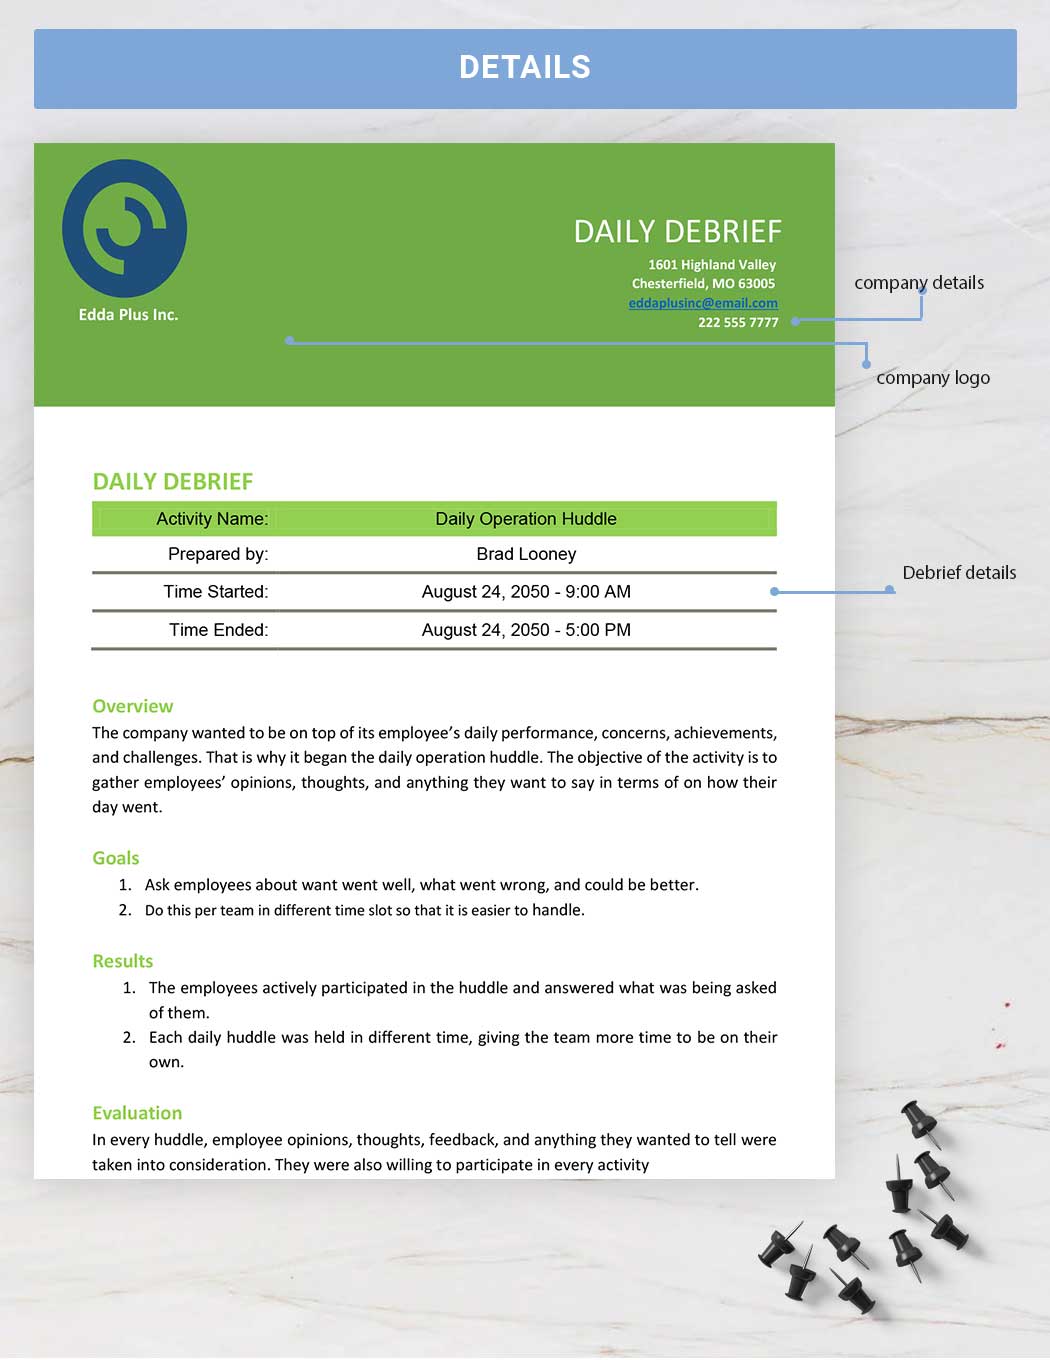 Daily Debrief Template